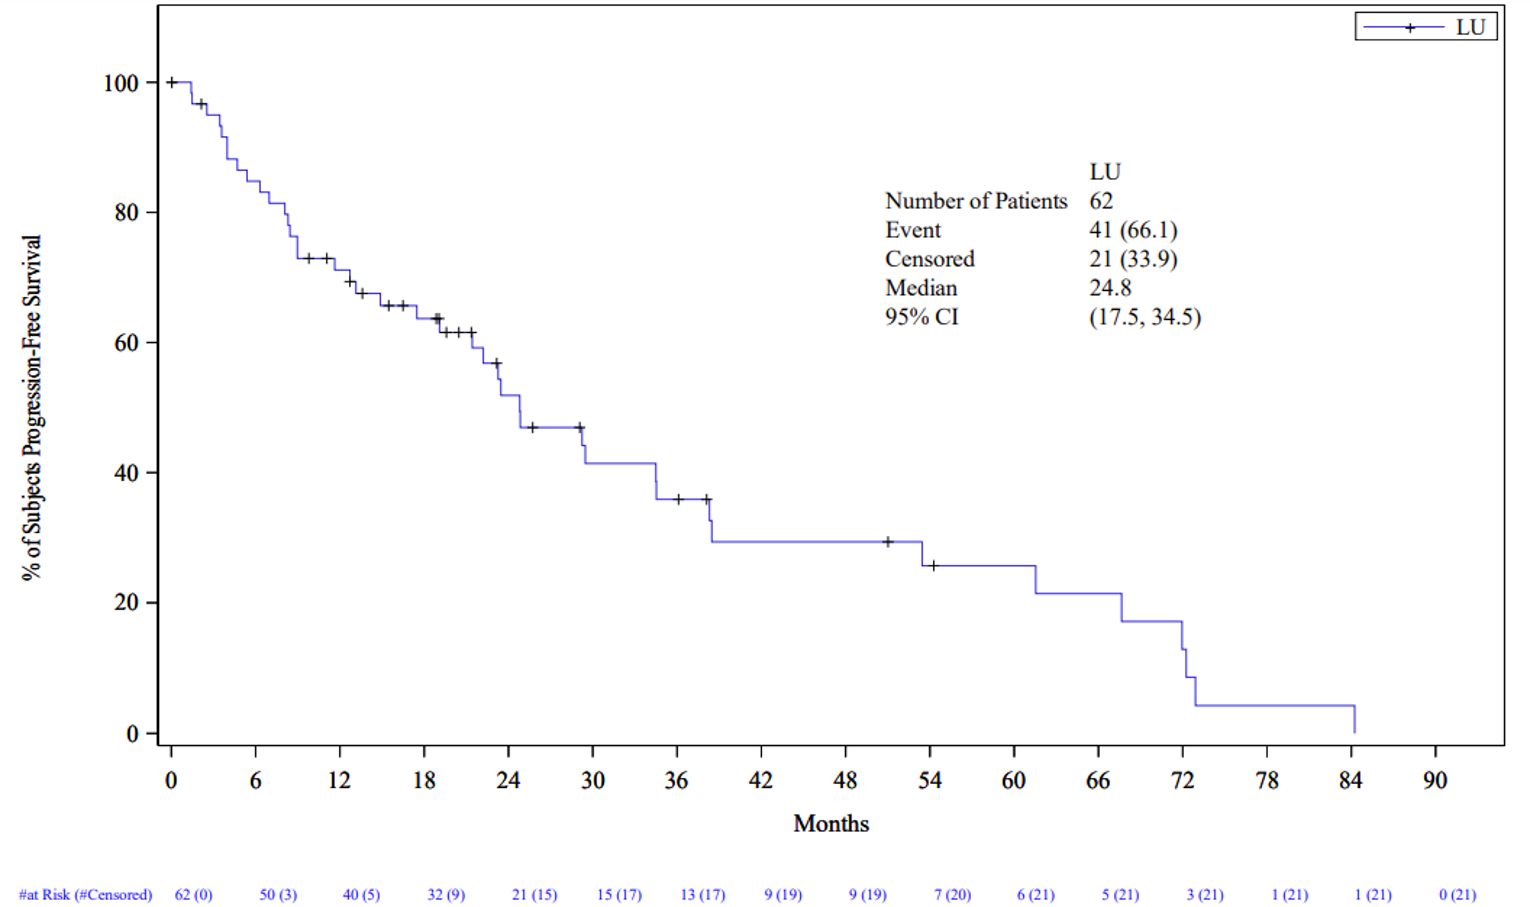 A Kaplan-Meier plot of PFS by months with 177Lu oxodotreotide in the NETTER-R study(N = 62). The y-axis is percentage of patient progression-free survival (0 to 100%); the x-axis is months (0 to 90 months). A total of 41 progression-free survival events (66.1%) occurred, and 21 patients (33.9%) were censored for the analysis. The median progression-free survival was 24.8 months (95% CI, 17.5 to 34.5).